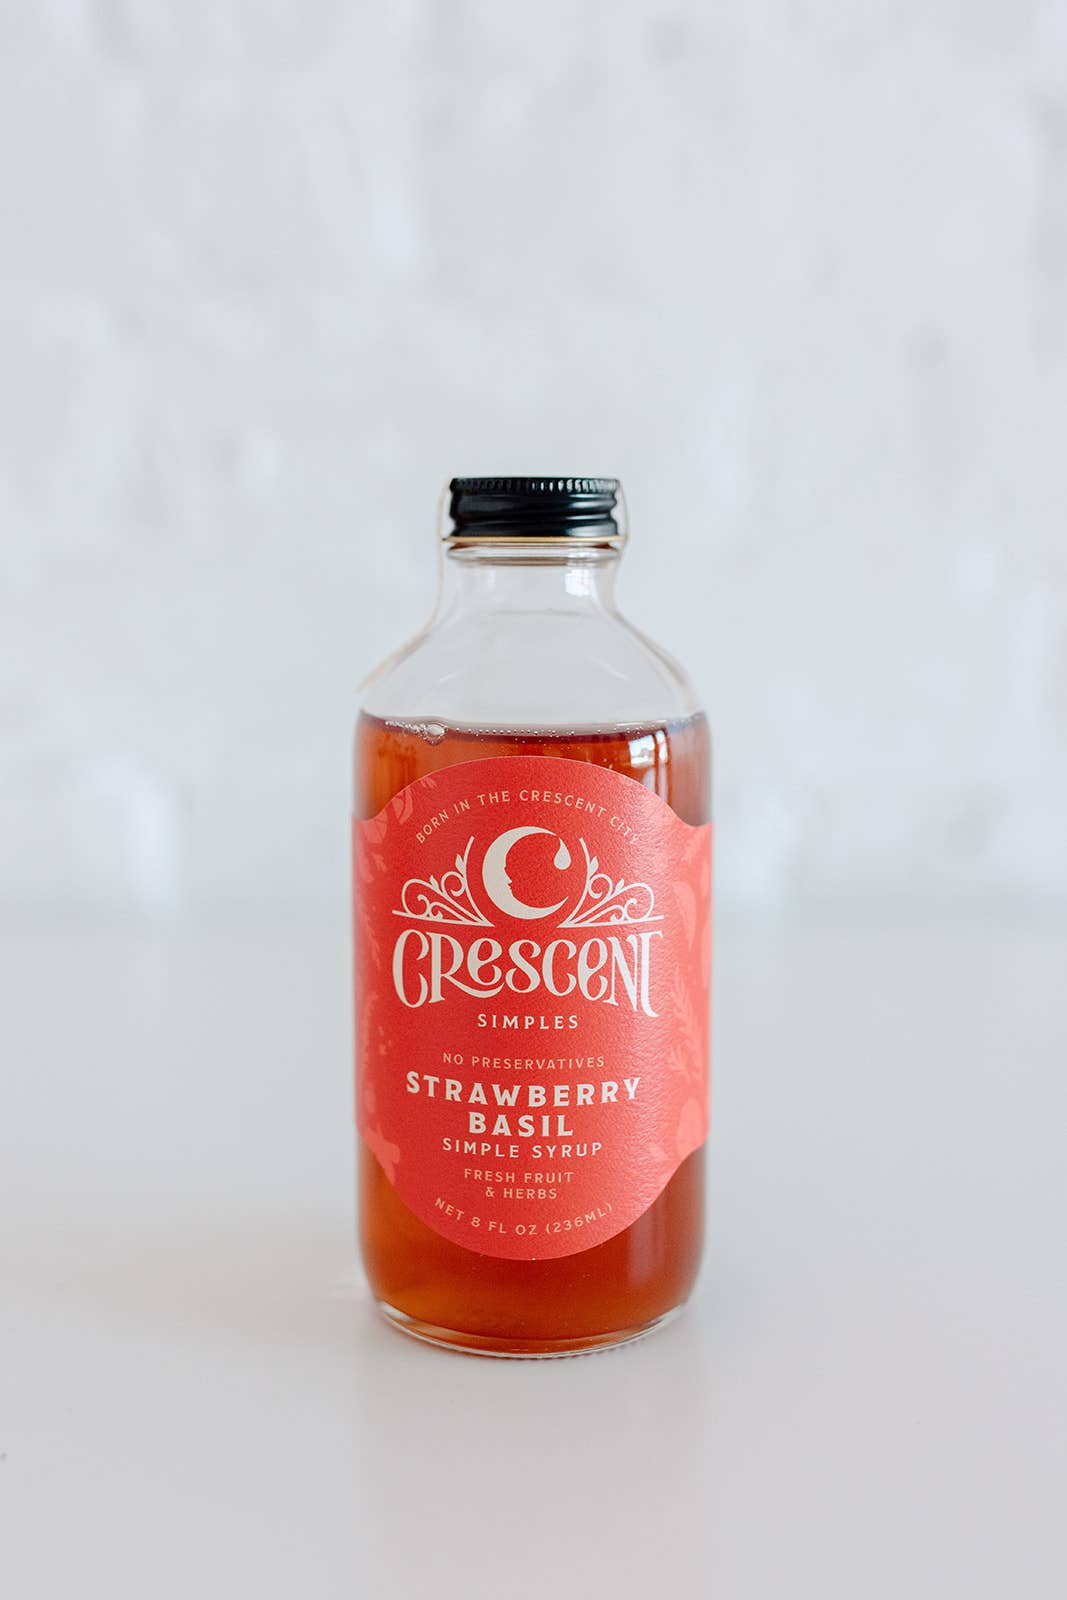 crescent simple syrup strawberry basil